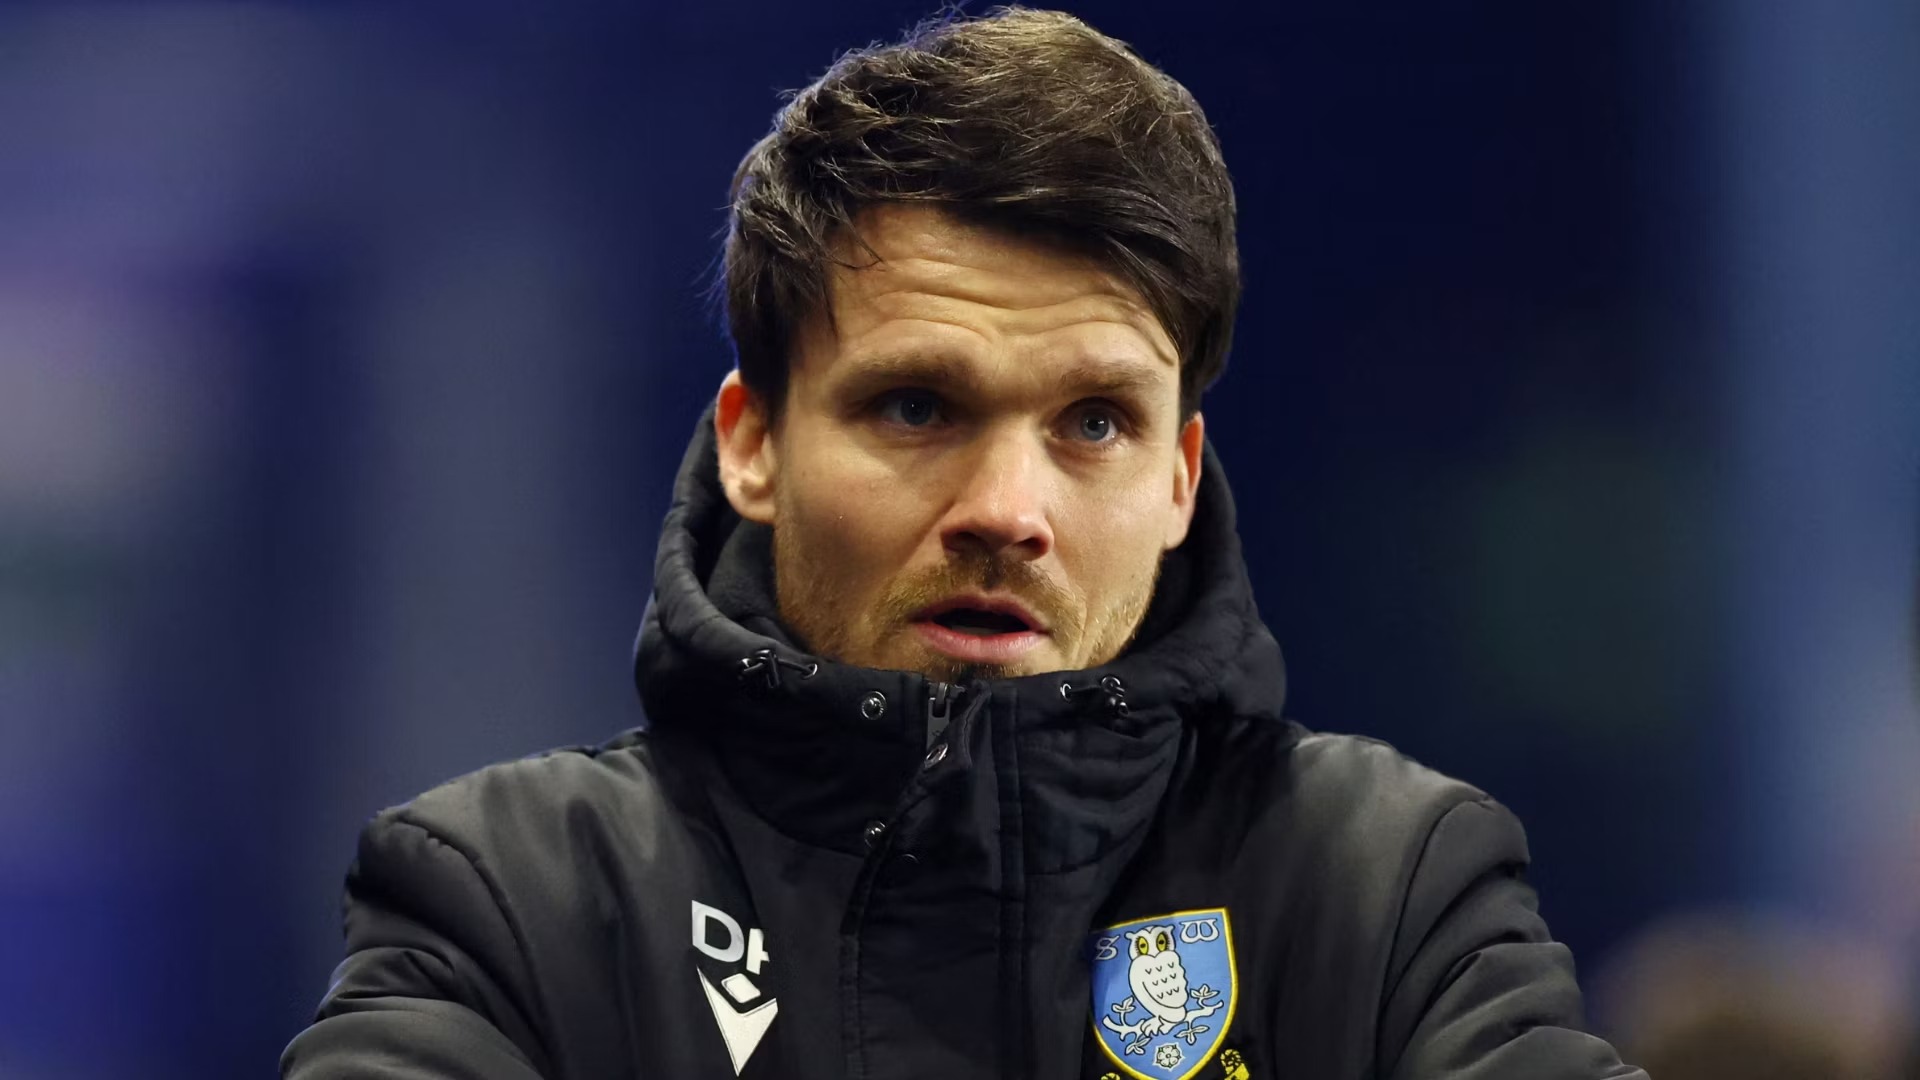 If It’s Possible I will Terminate My Contract Deal:  Sheffield Wednesday Head Coach Danny Rohl  Firmly Denies Allegations, Asserts Refusal to Accept Pay Cut